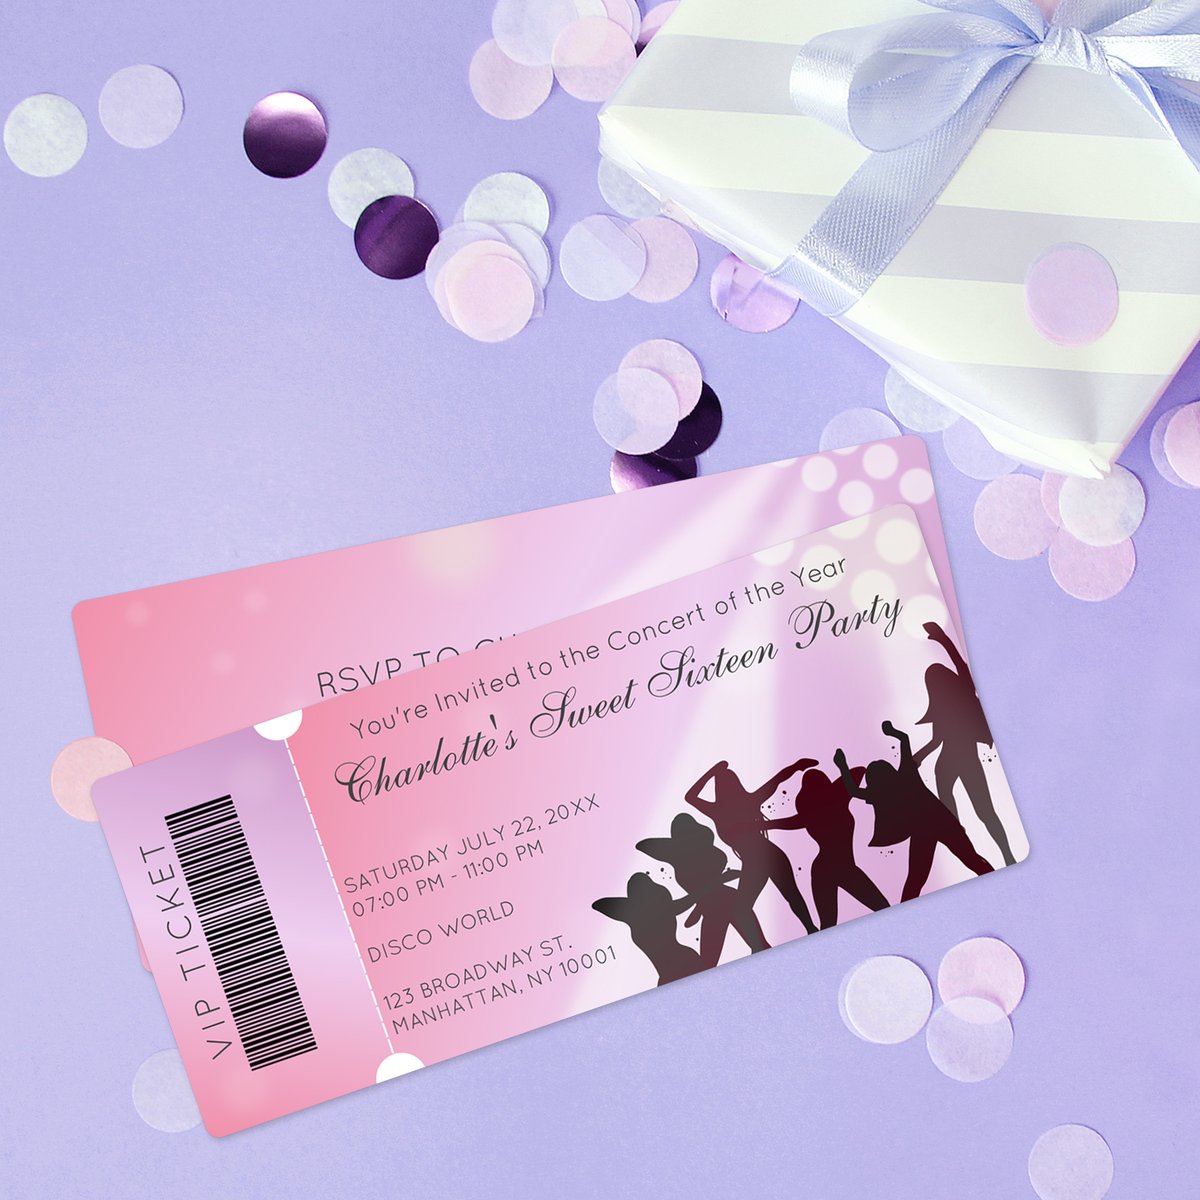 Make her Sweet Sixteen the hottest ticket in town! Our Concert Ticket Party Invitation is as trendy as it gets. 🎟️Customize it and let the party begin! 🎉

Check it out on zazzle.com/concert_ticket…

 #SweetSixteen #PartyInvitations